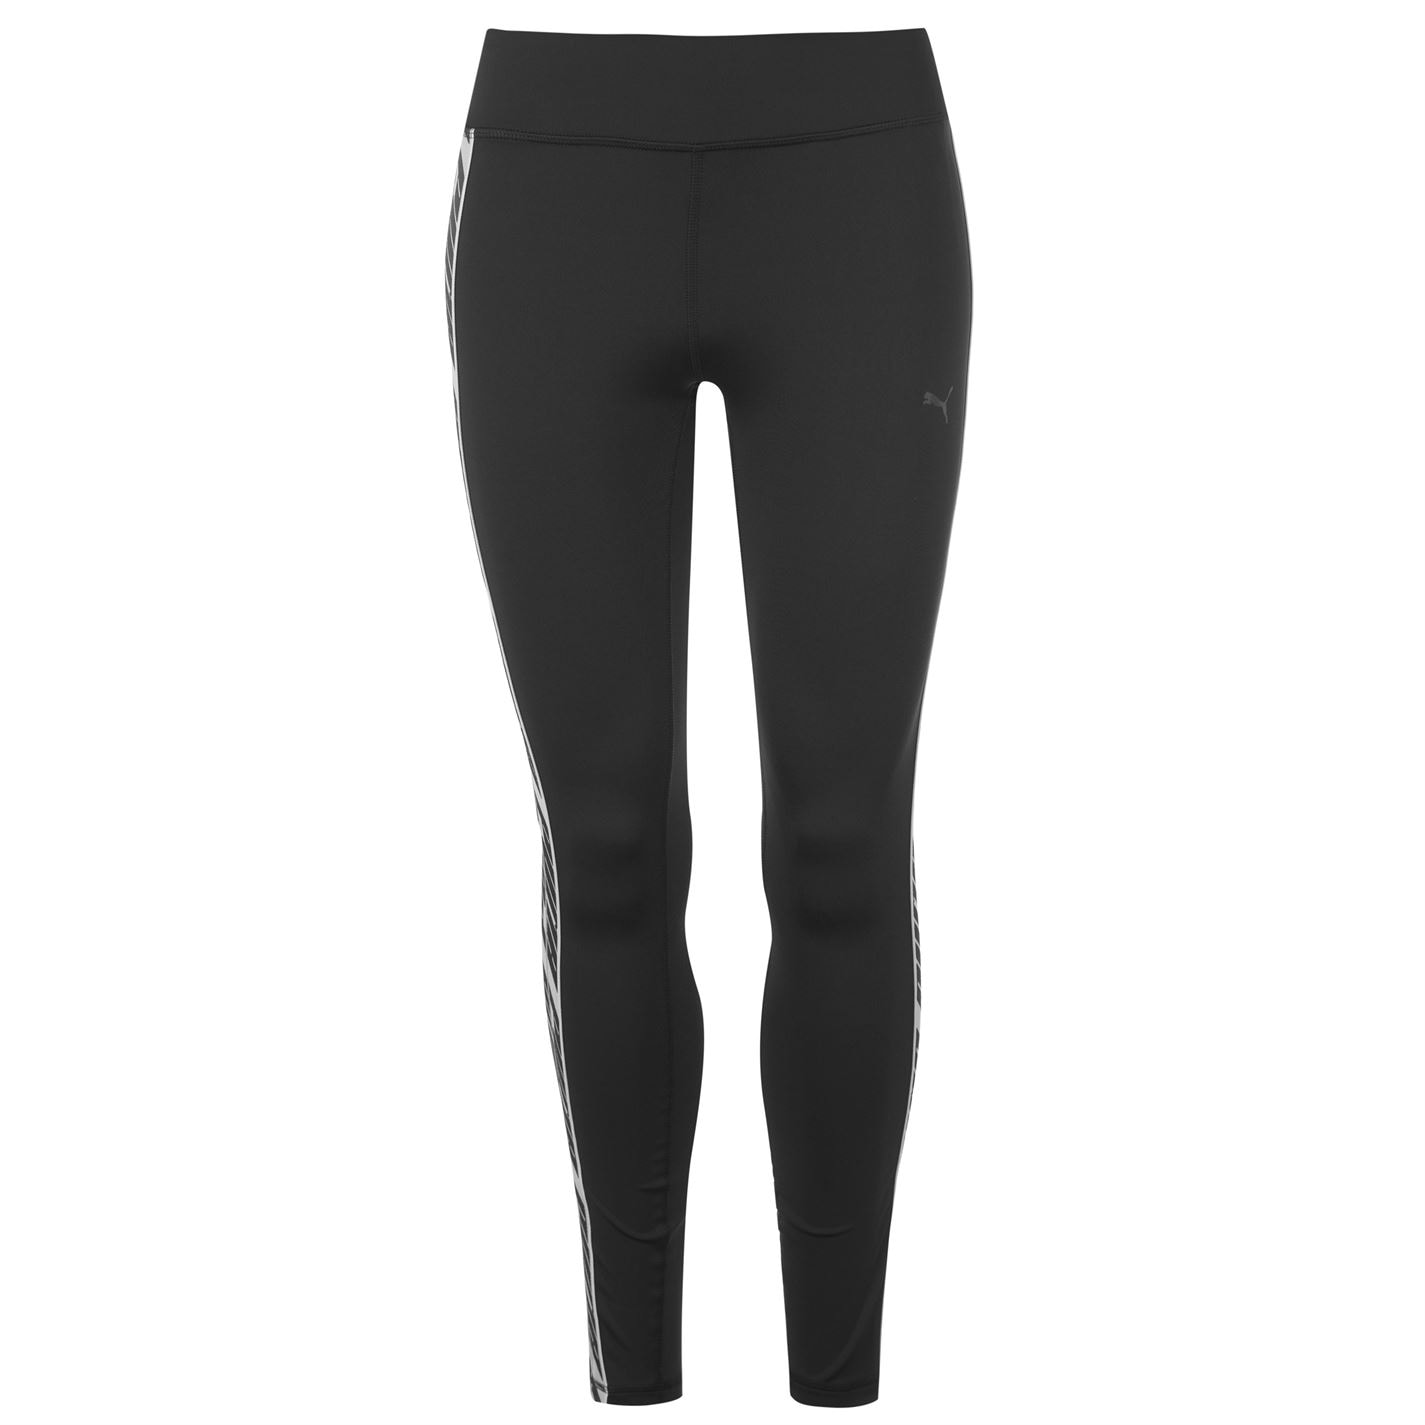 conquer fitness leggings sweden